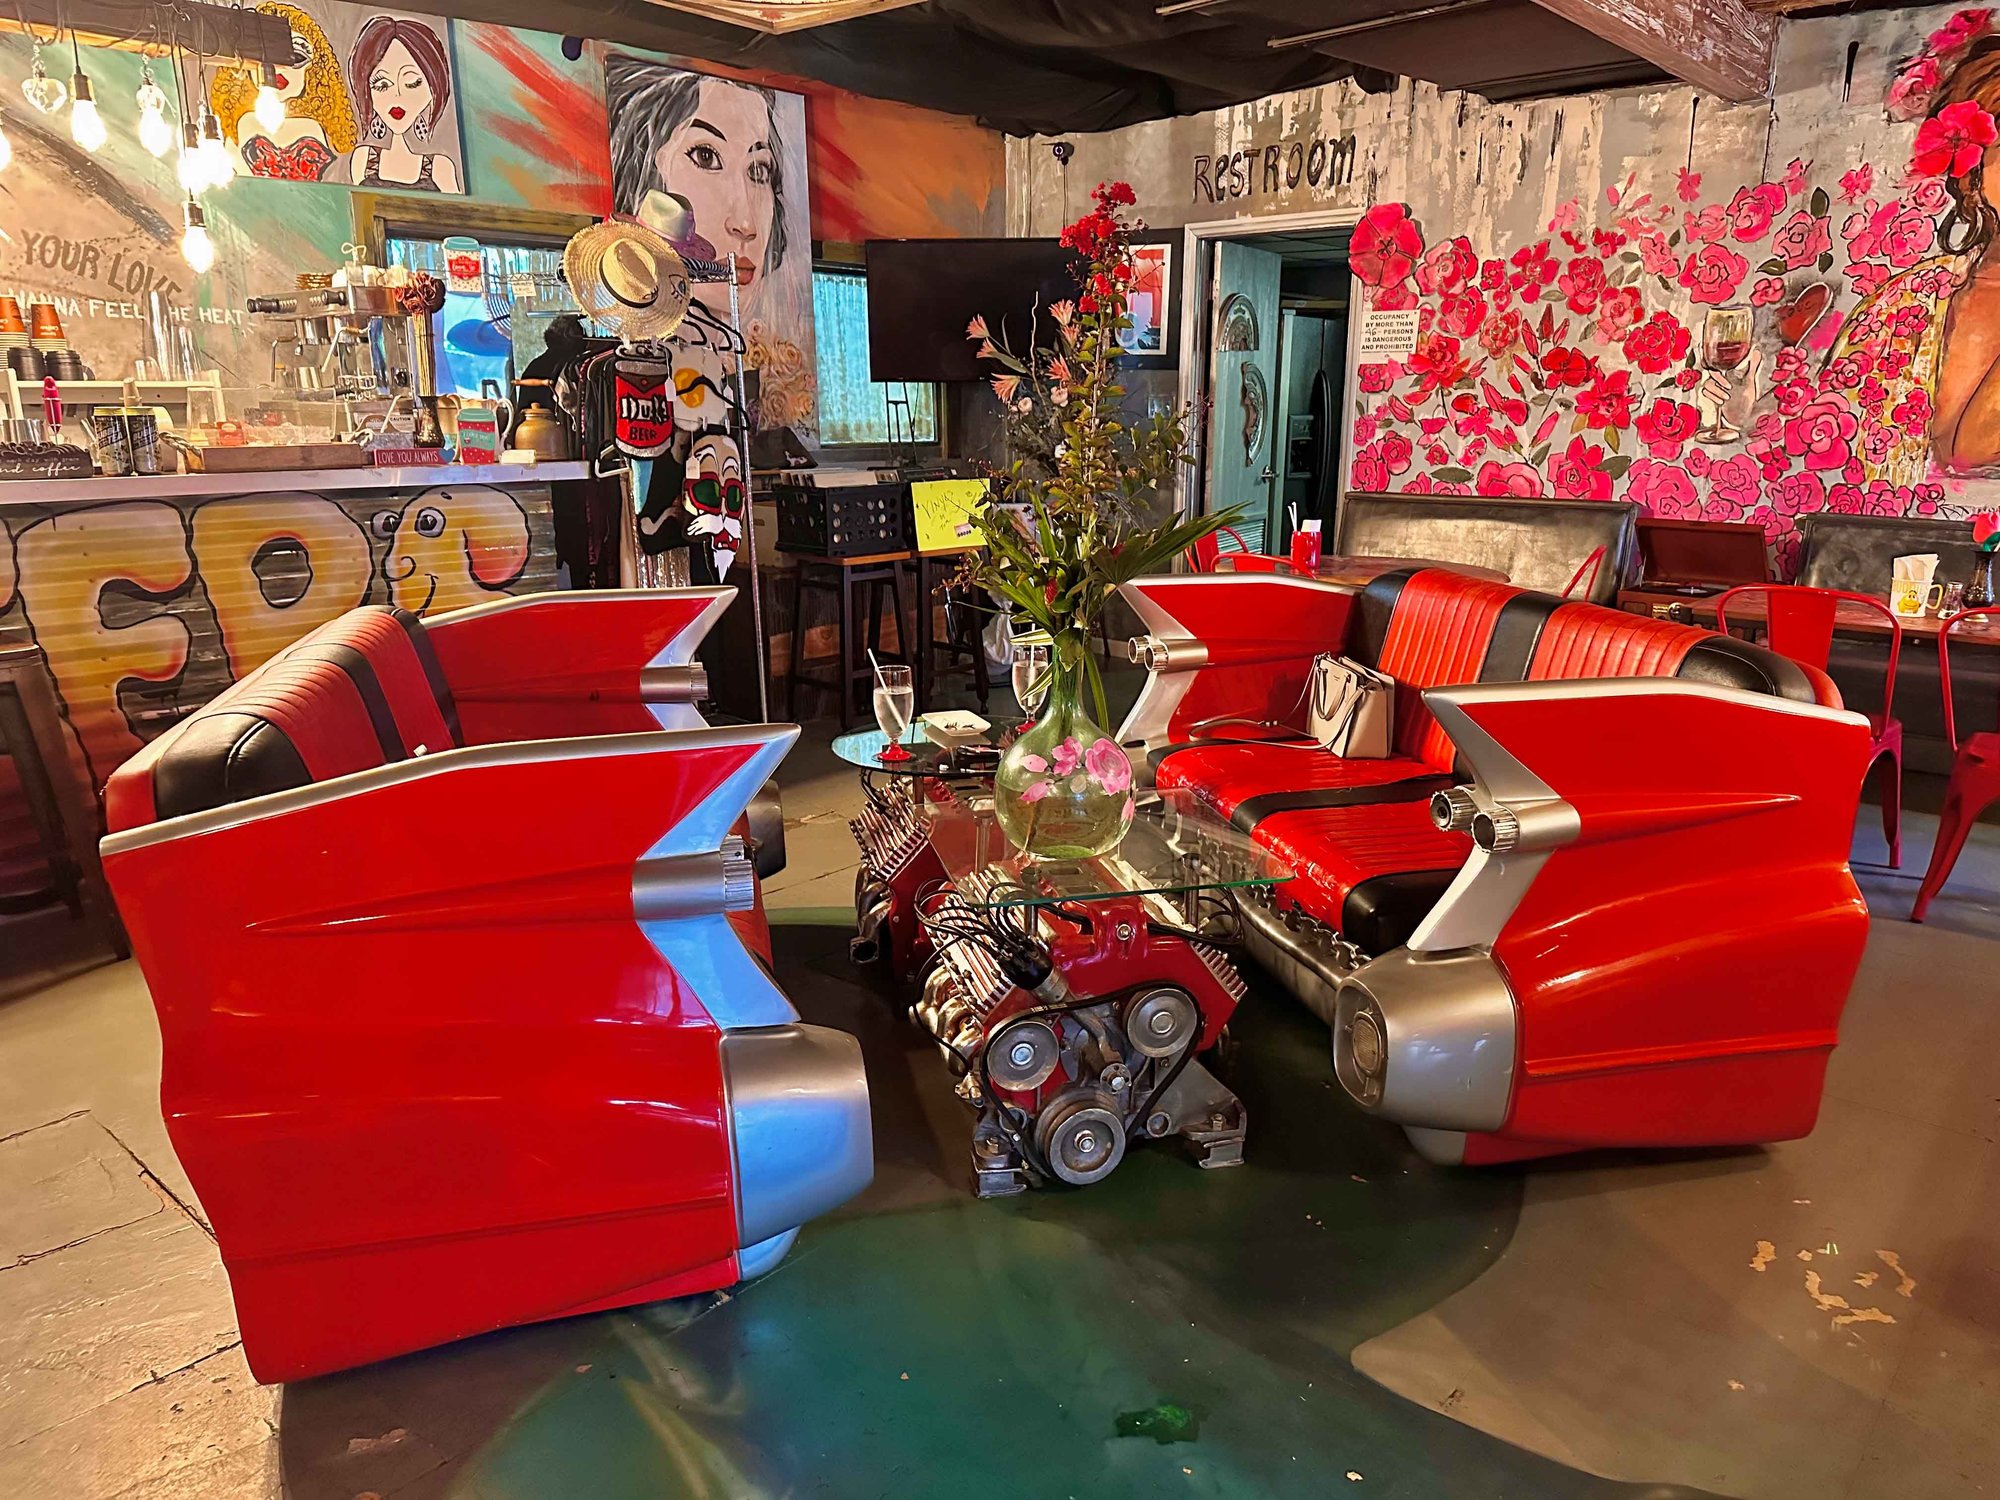 half of a corvette as sofas with a table and decor around